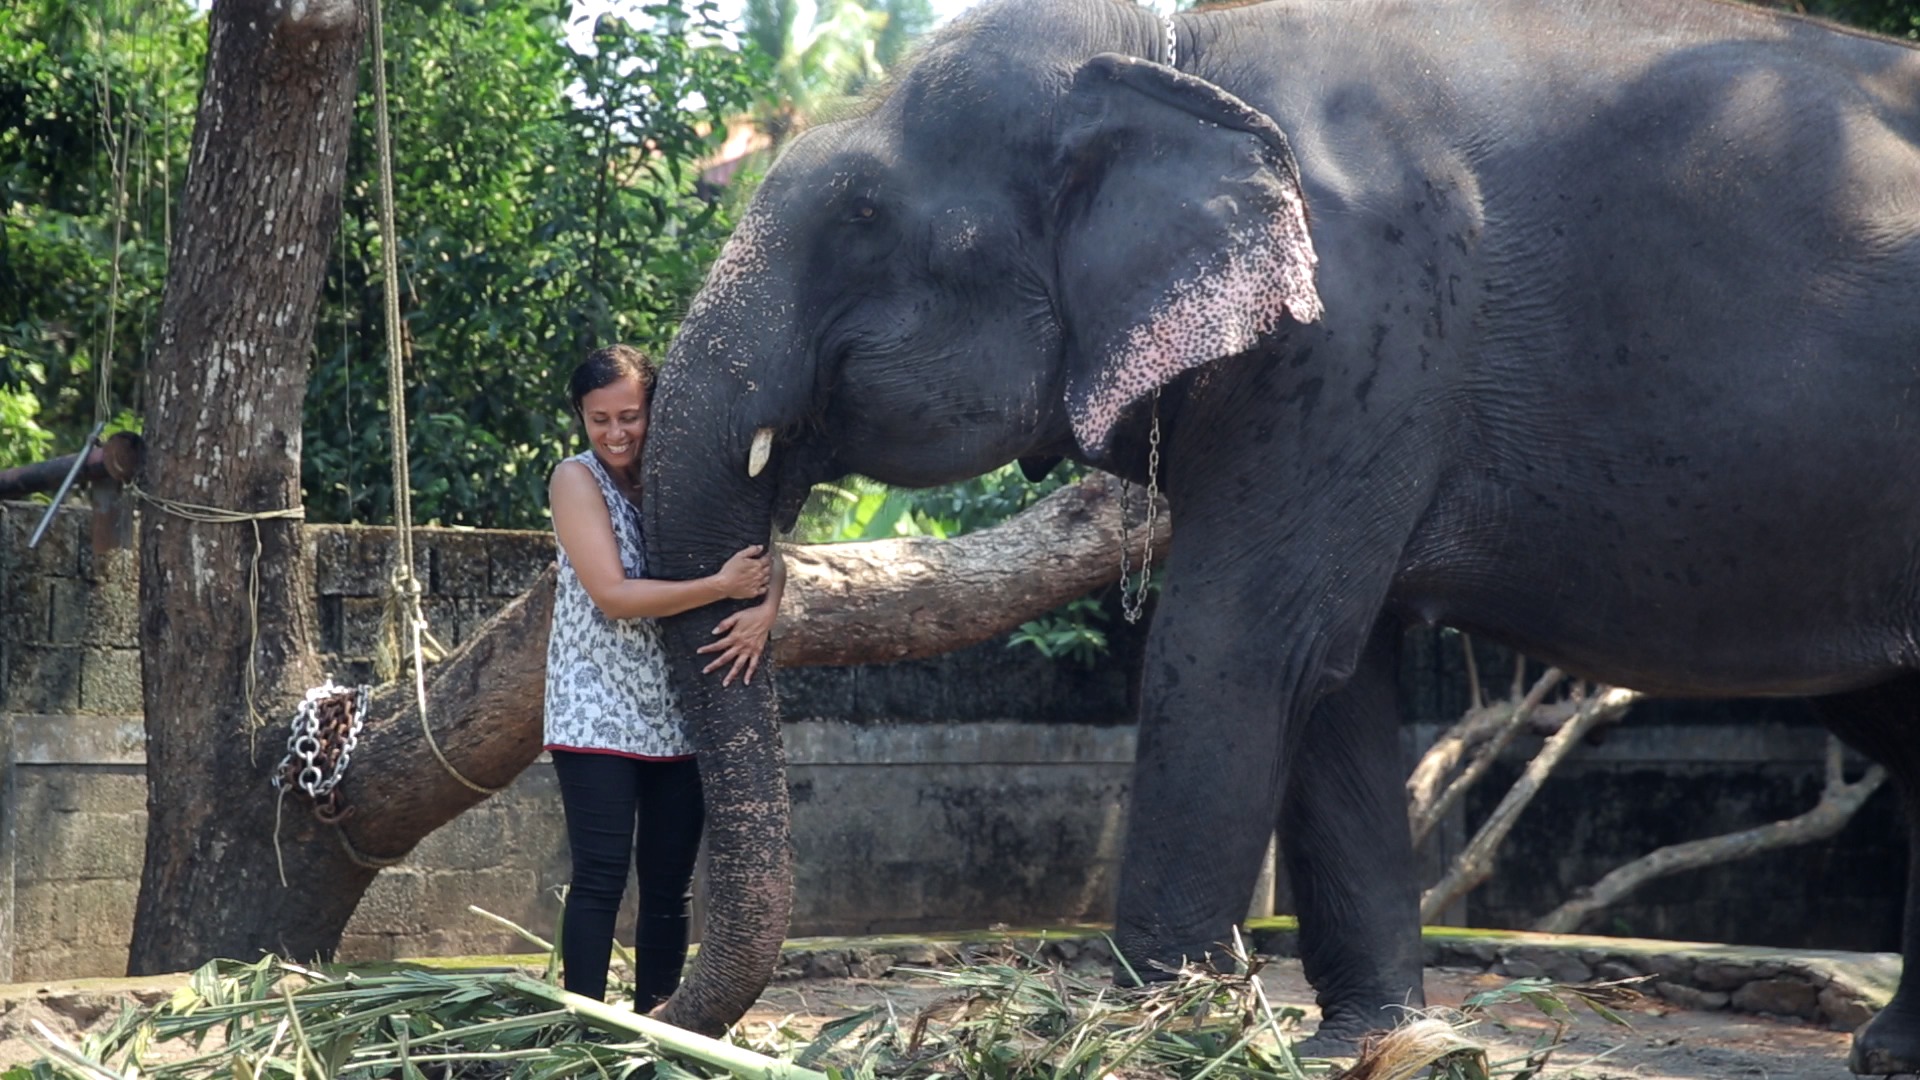 A courageous woman determined to protect India’s majestic elephants from abuse